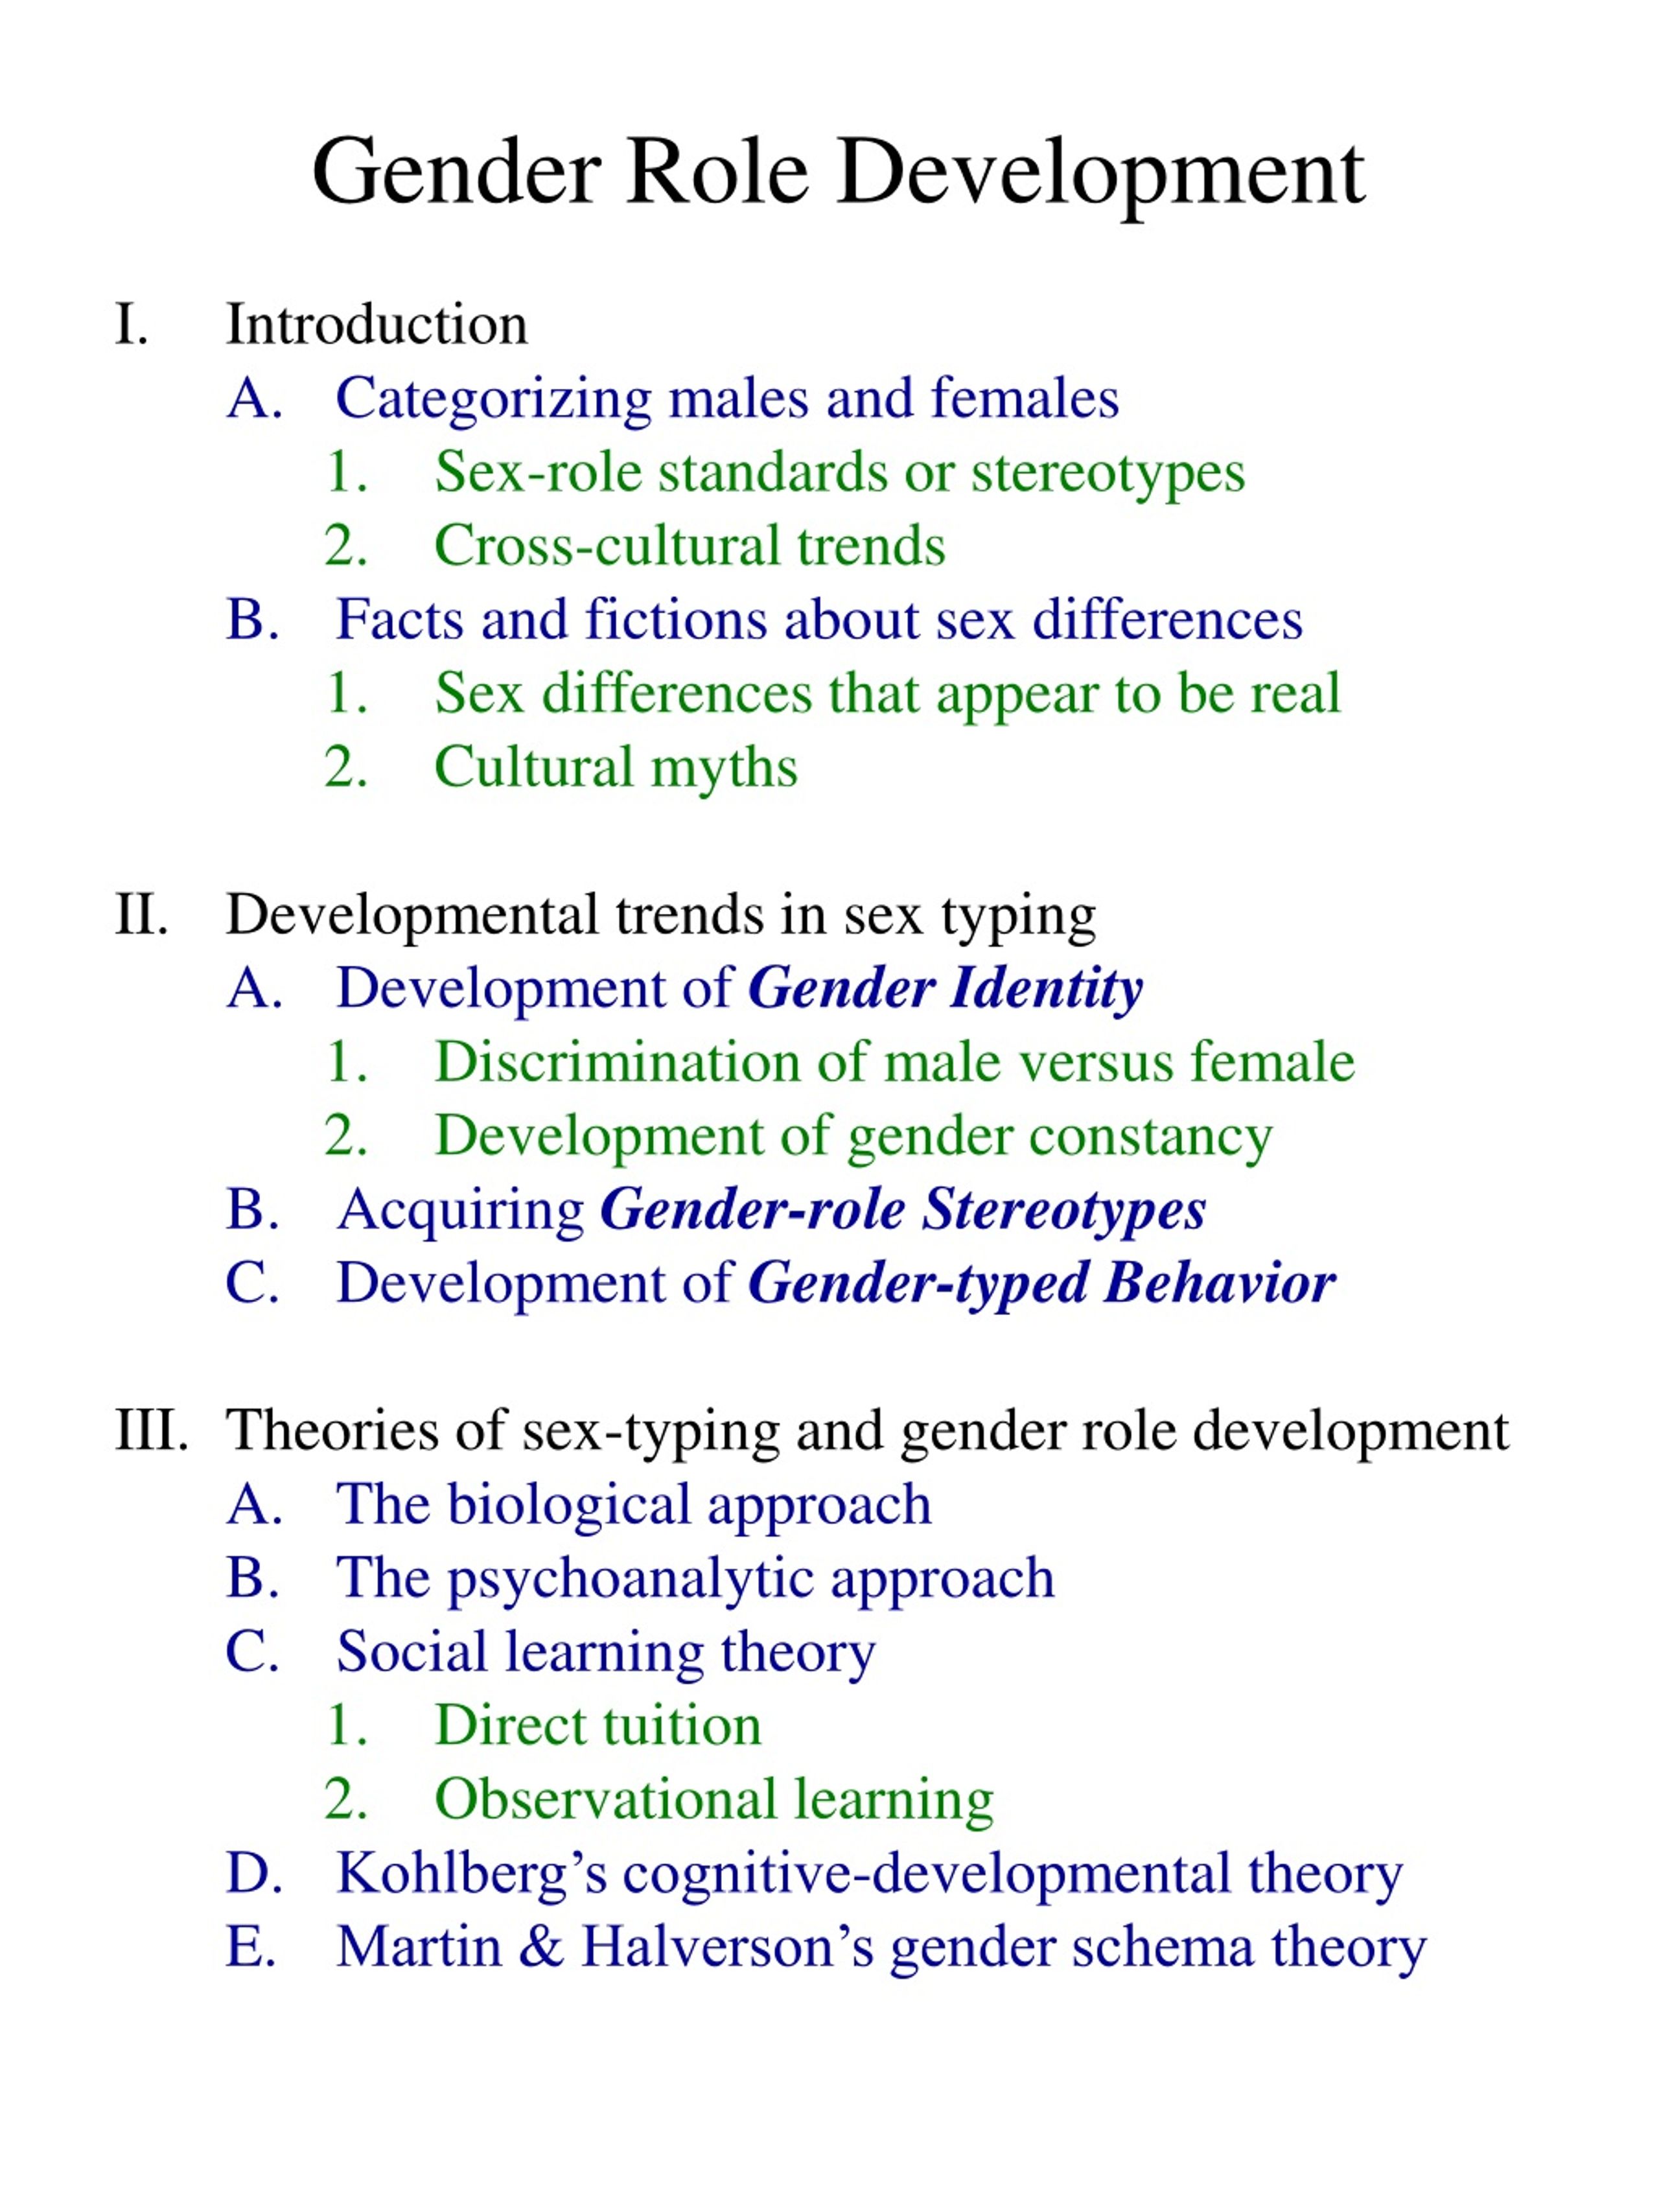 research on gender and development